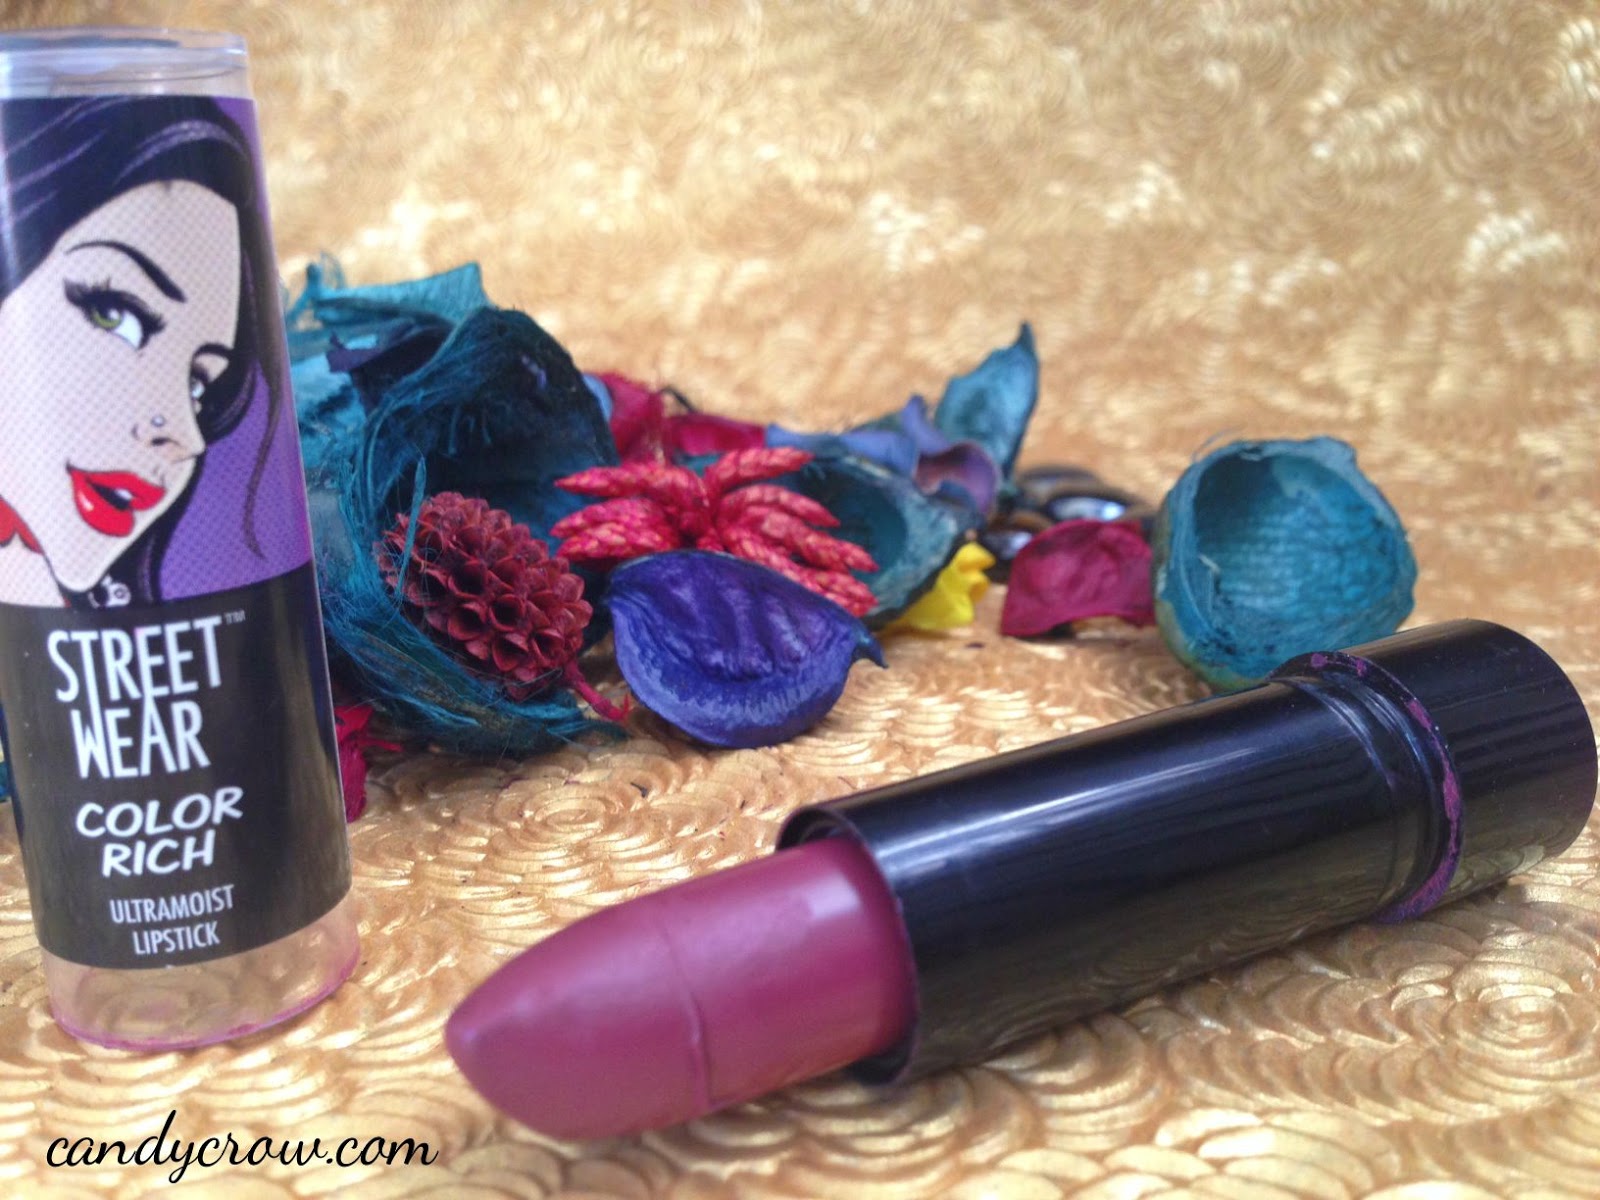 Street Wear Color Rich Lipstick - P.S I am sexy Review